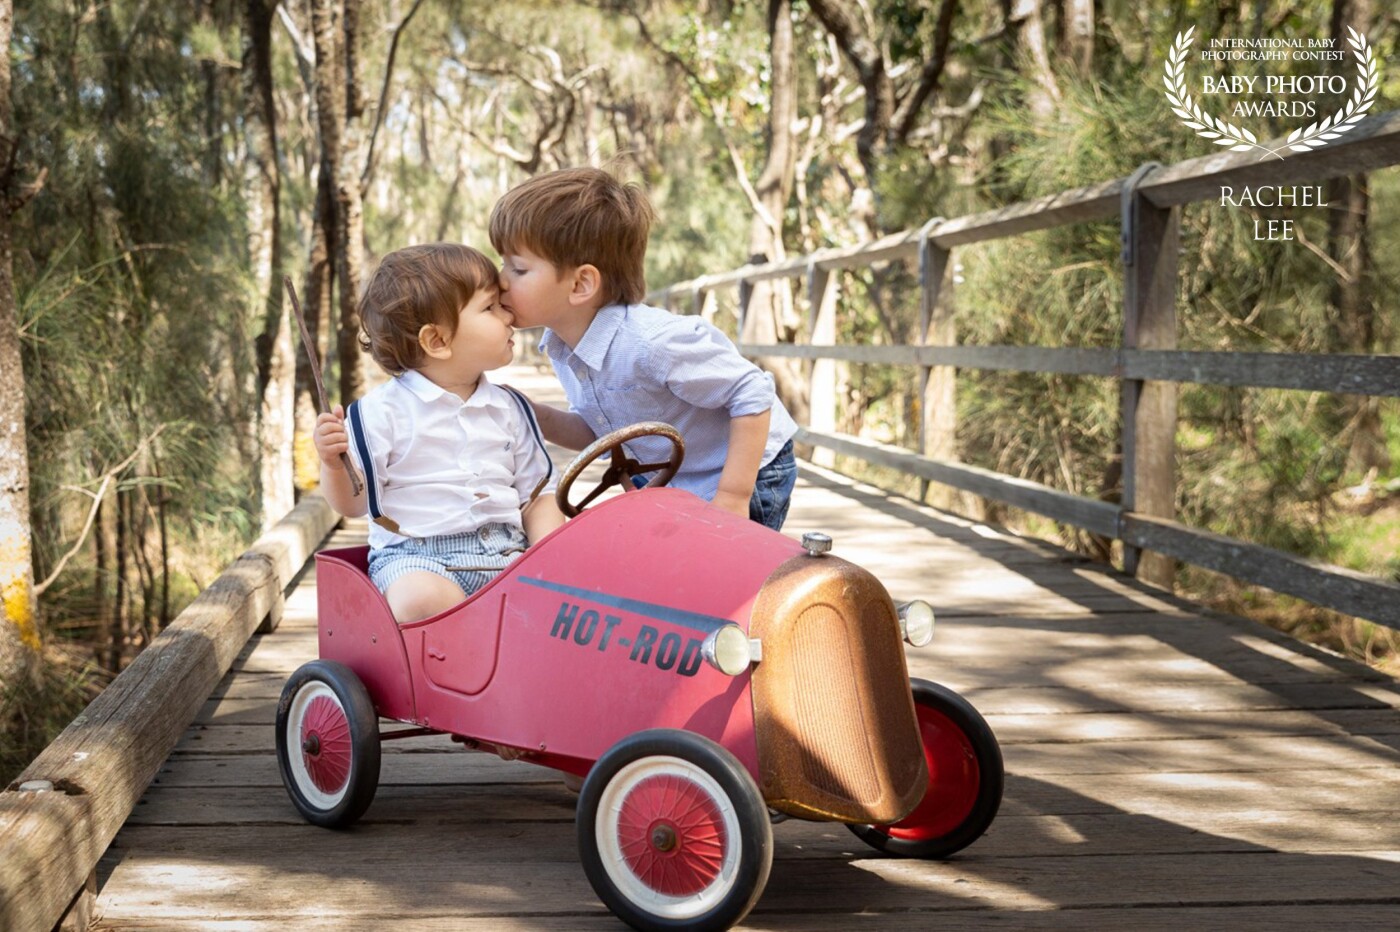 What I love most about this portrait is the juxtaposition of how boys love sticks and fast cars, but also sharing a tender moment between brothers. 